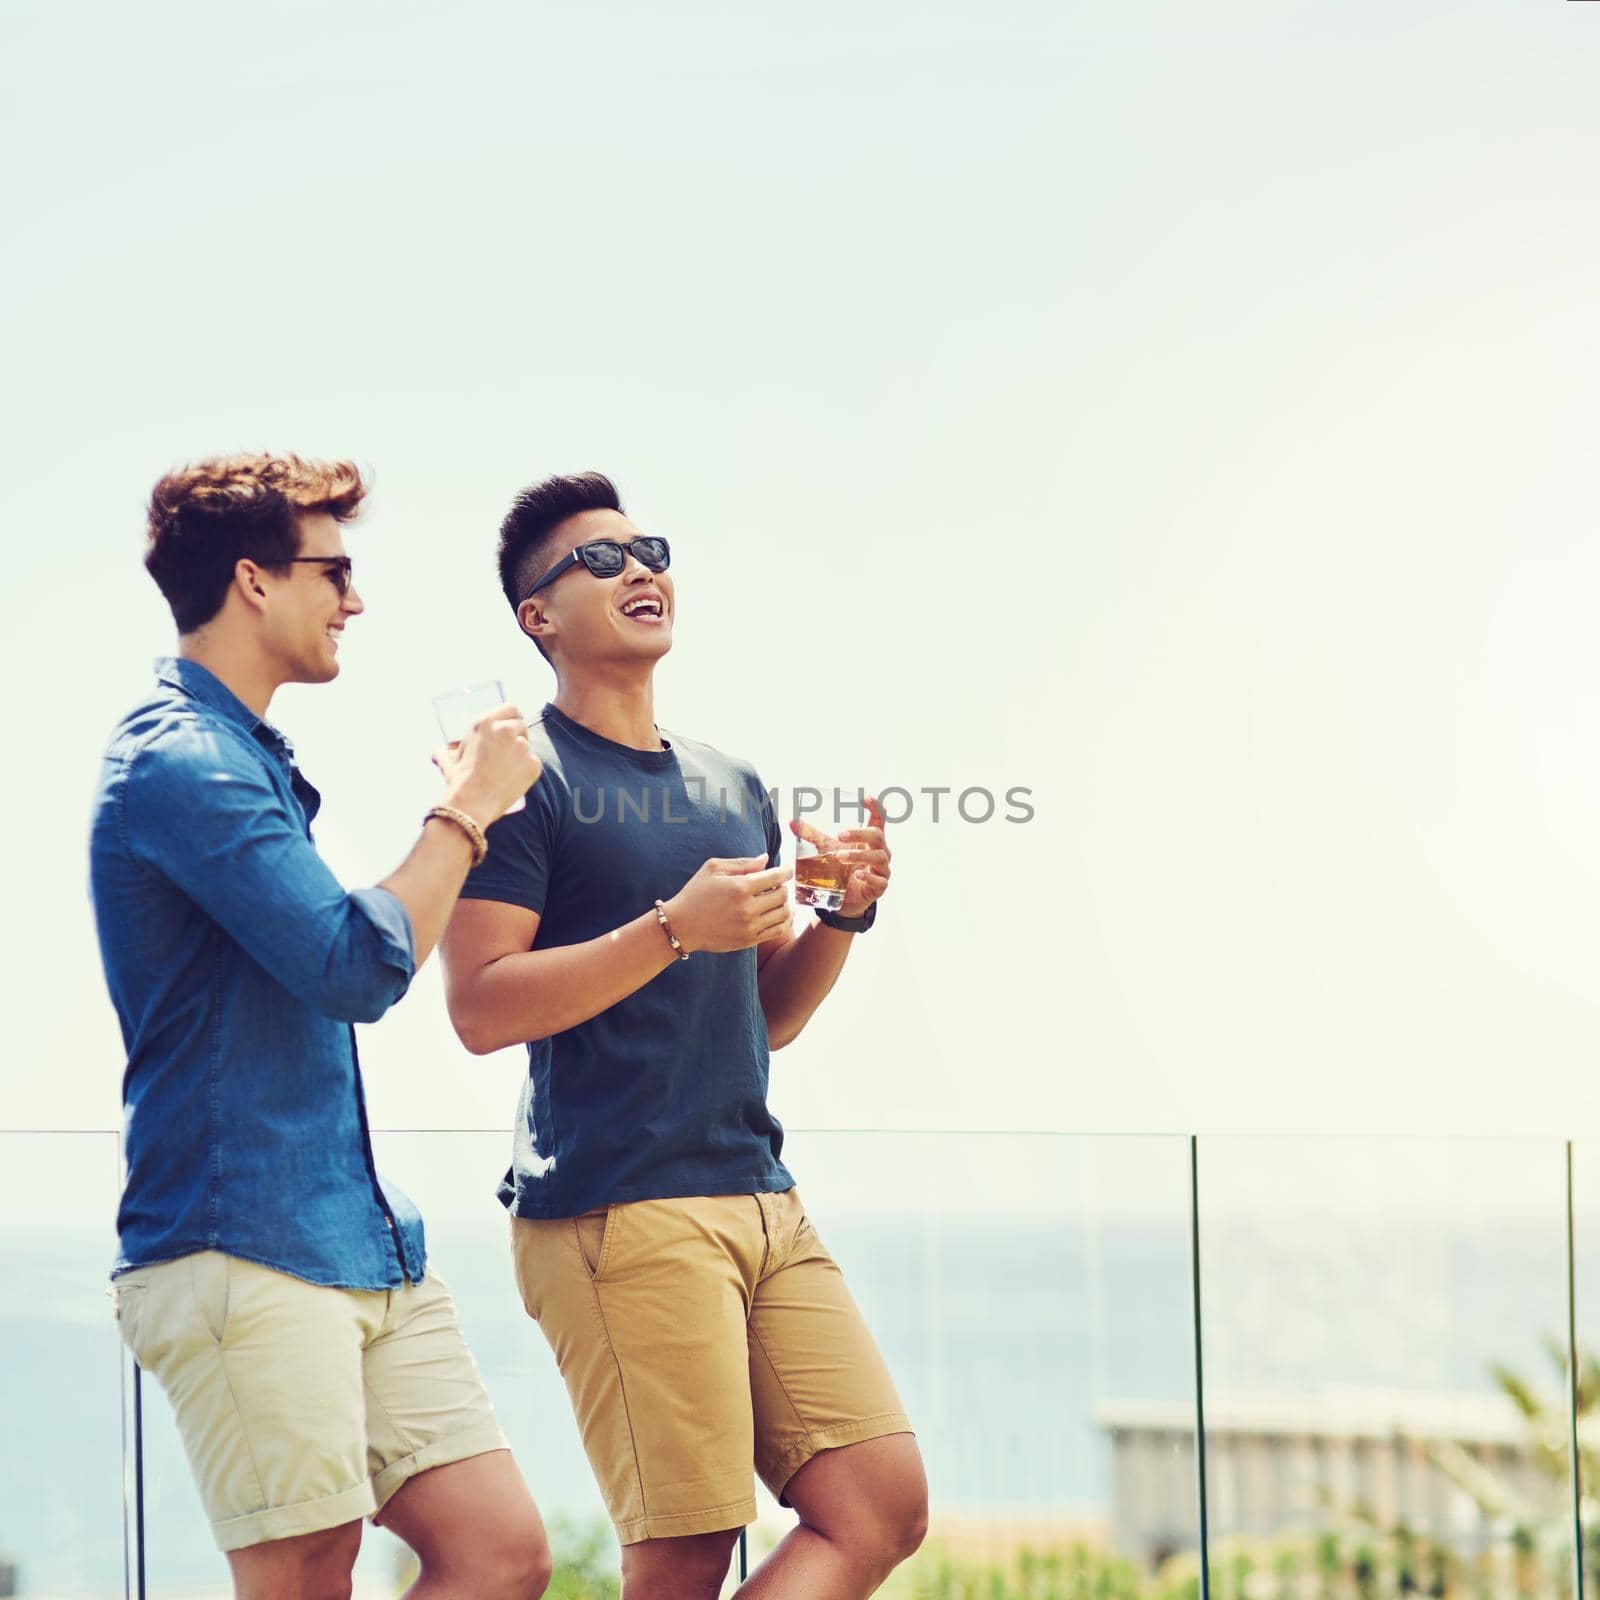 Nothing like a good laugh on holiday after a long year. Shot of two handsome young men having drinks and relaxing outdoors while on holiday. by YuriArcurs